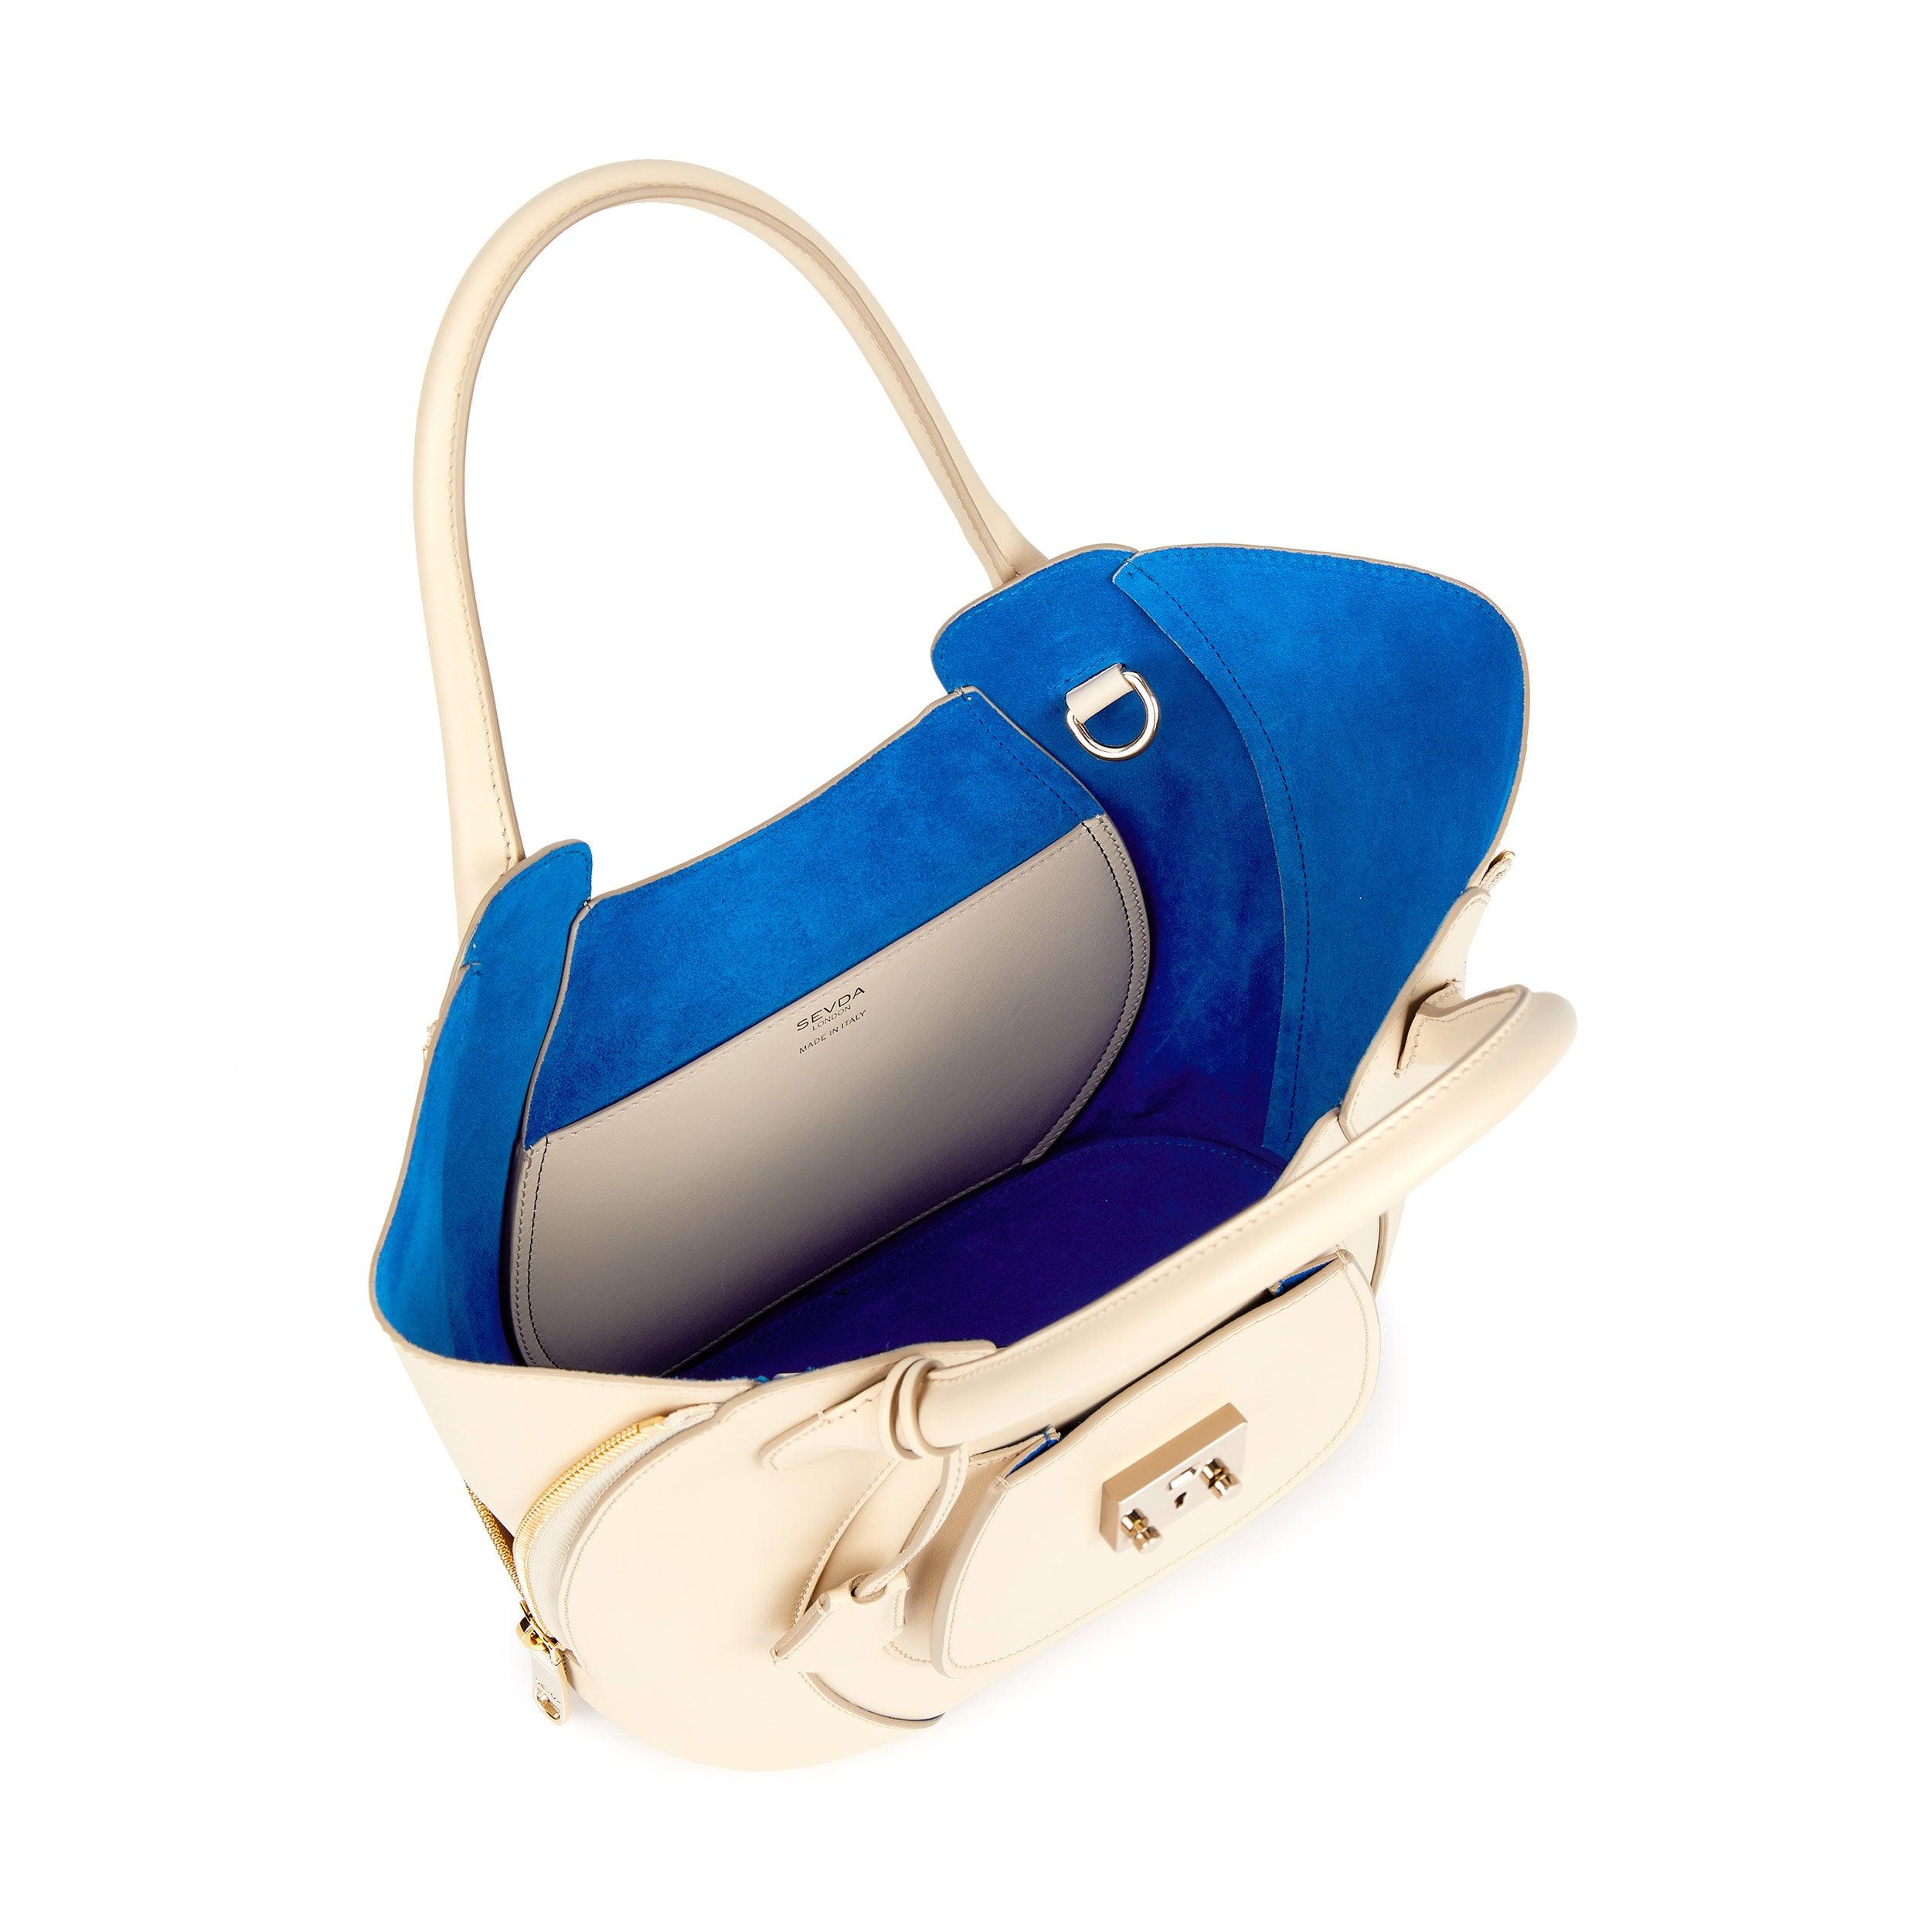 Ivory Leather Luxury Designer Bag with Blue Suede Lining - Fusion of London's style and Italian craftsmanship.